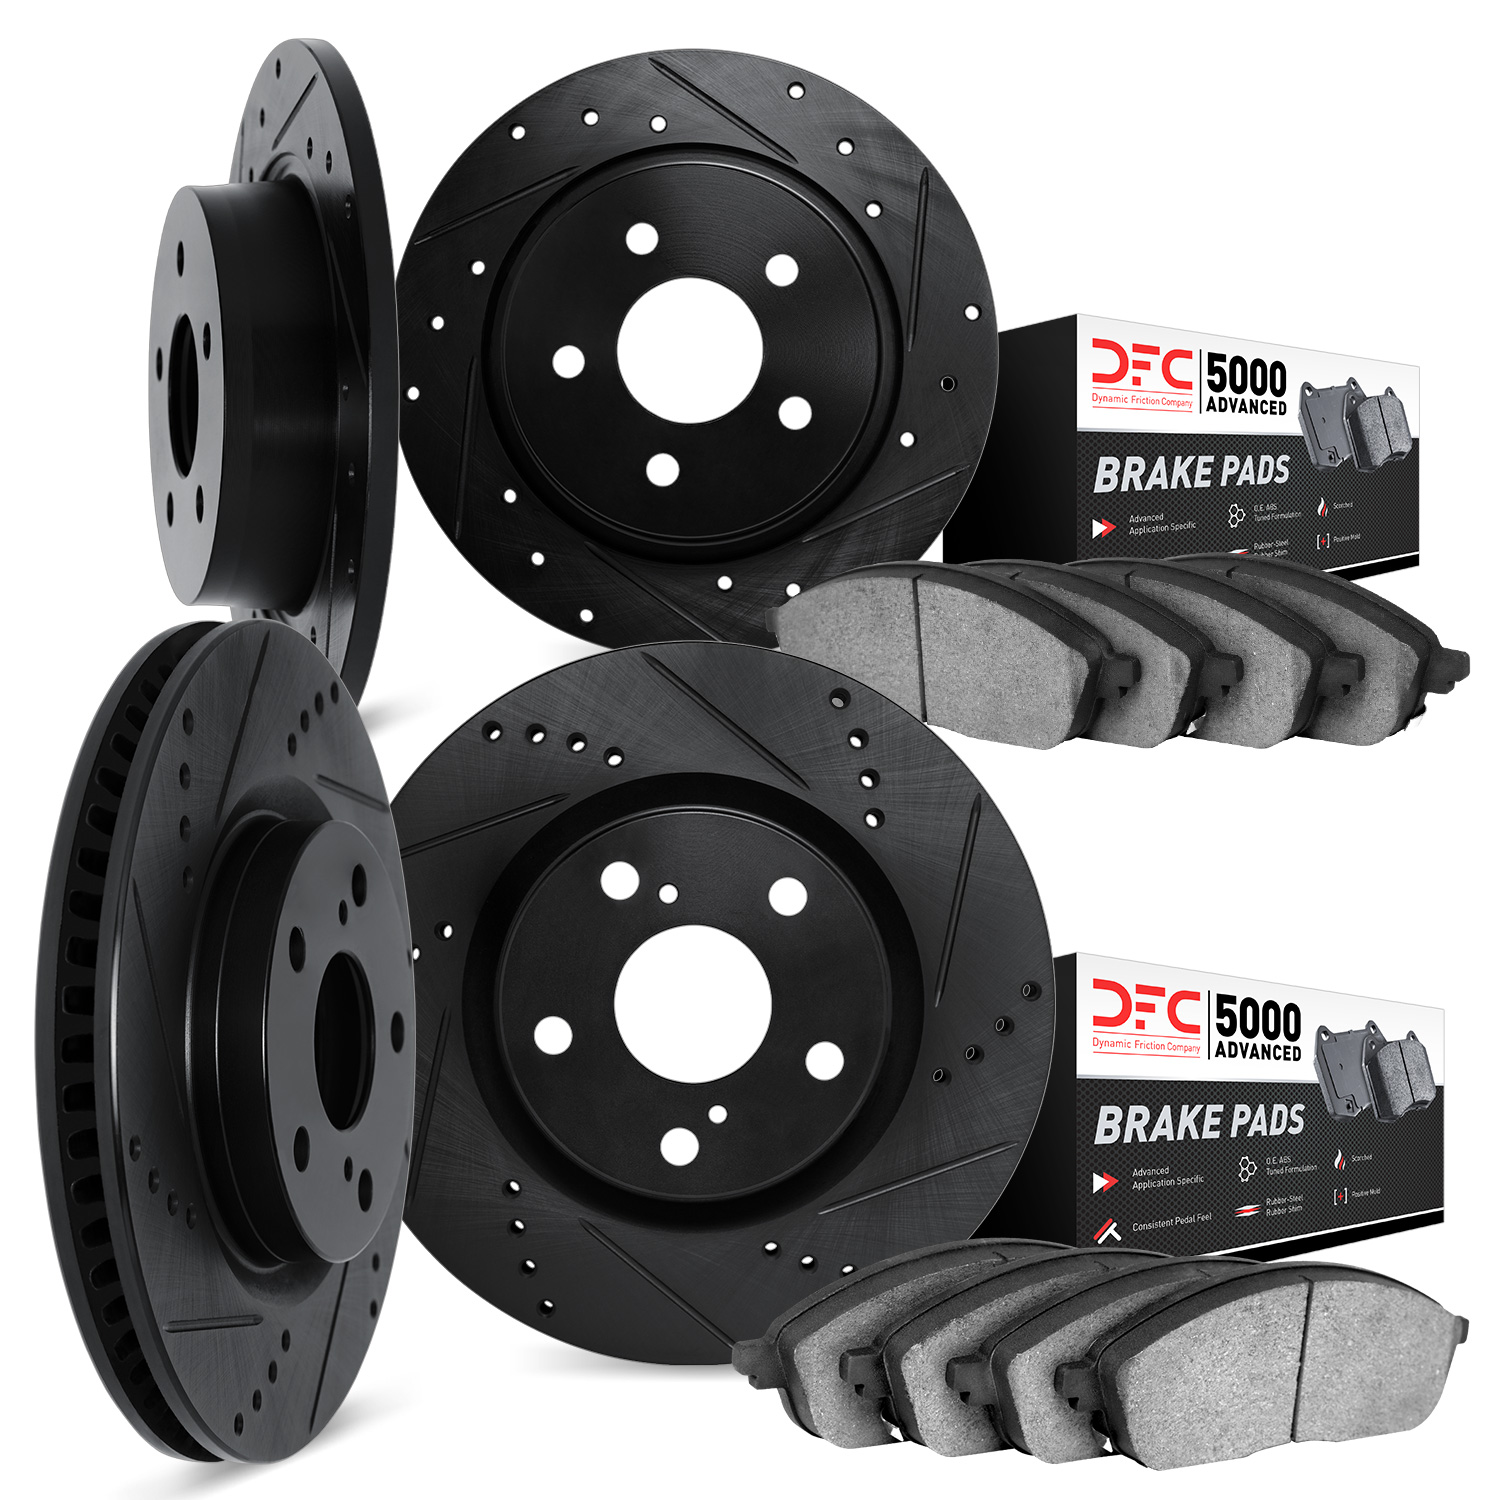 8504-46039 Drilled/Slotted Brake Rotors w/5000 Advanced Brake Pads Kit [Black], 2014-2019 GM, Position: Front and Rear